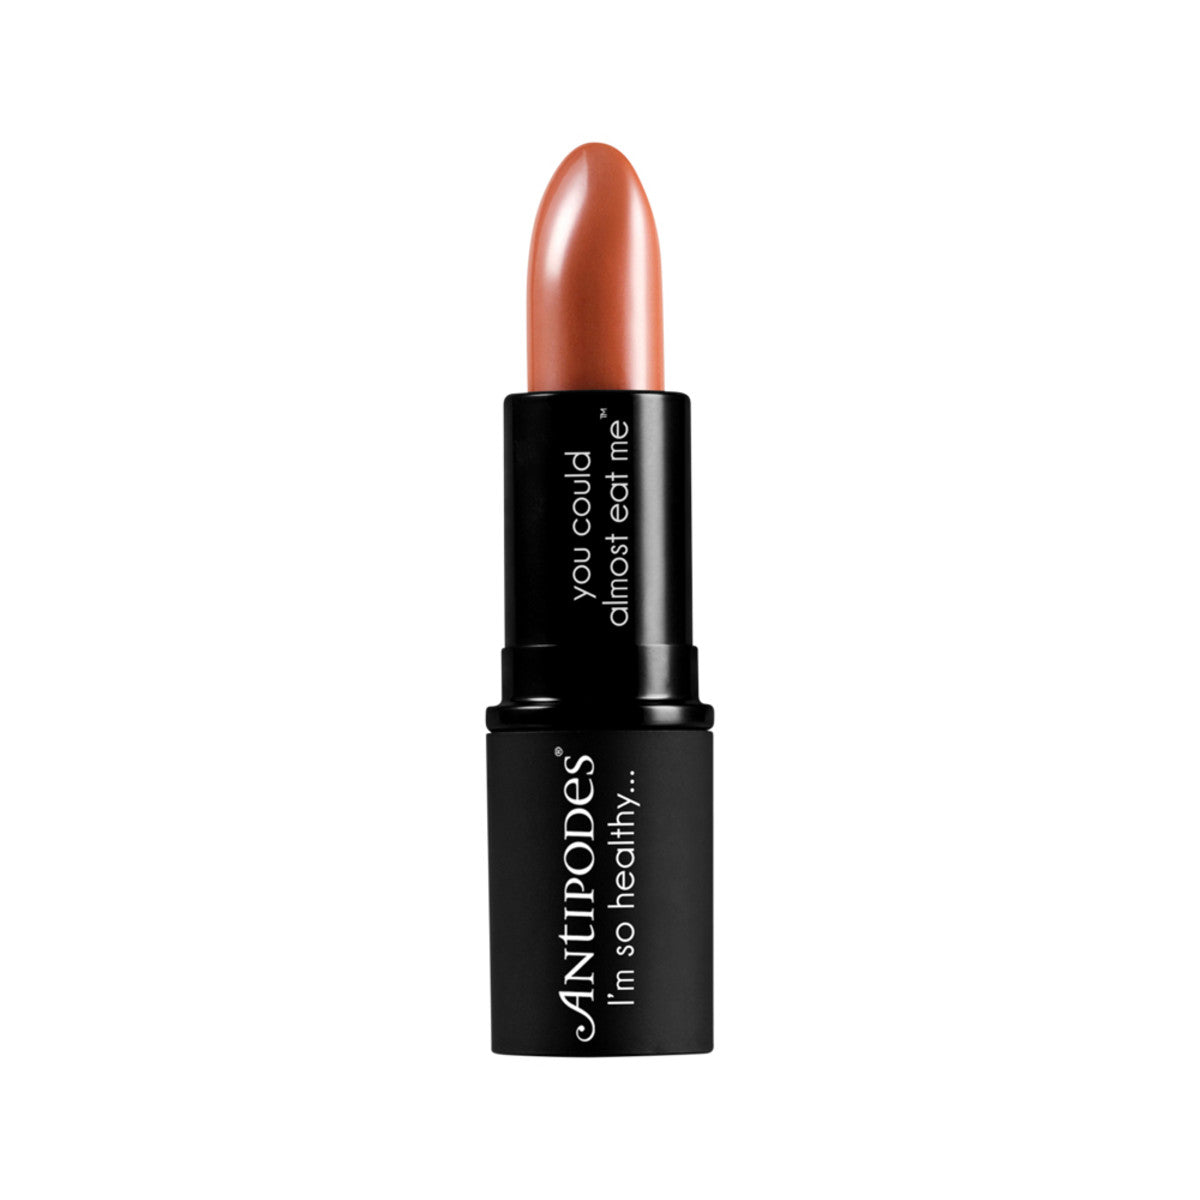 Antipodes Queenstown Hot Chocolate Moisture-Boost Natural Lipstick 4g-The Living Co.